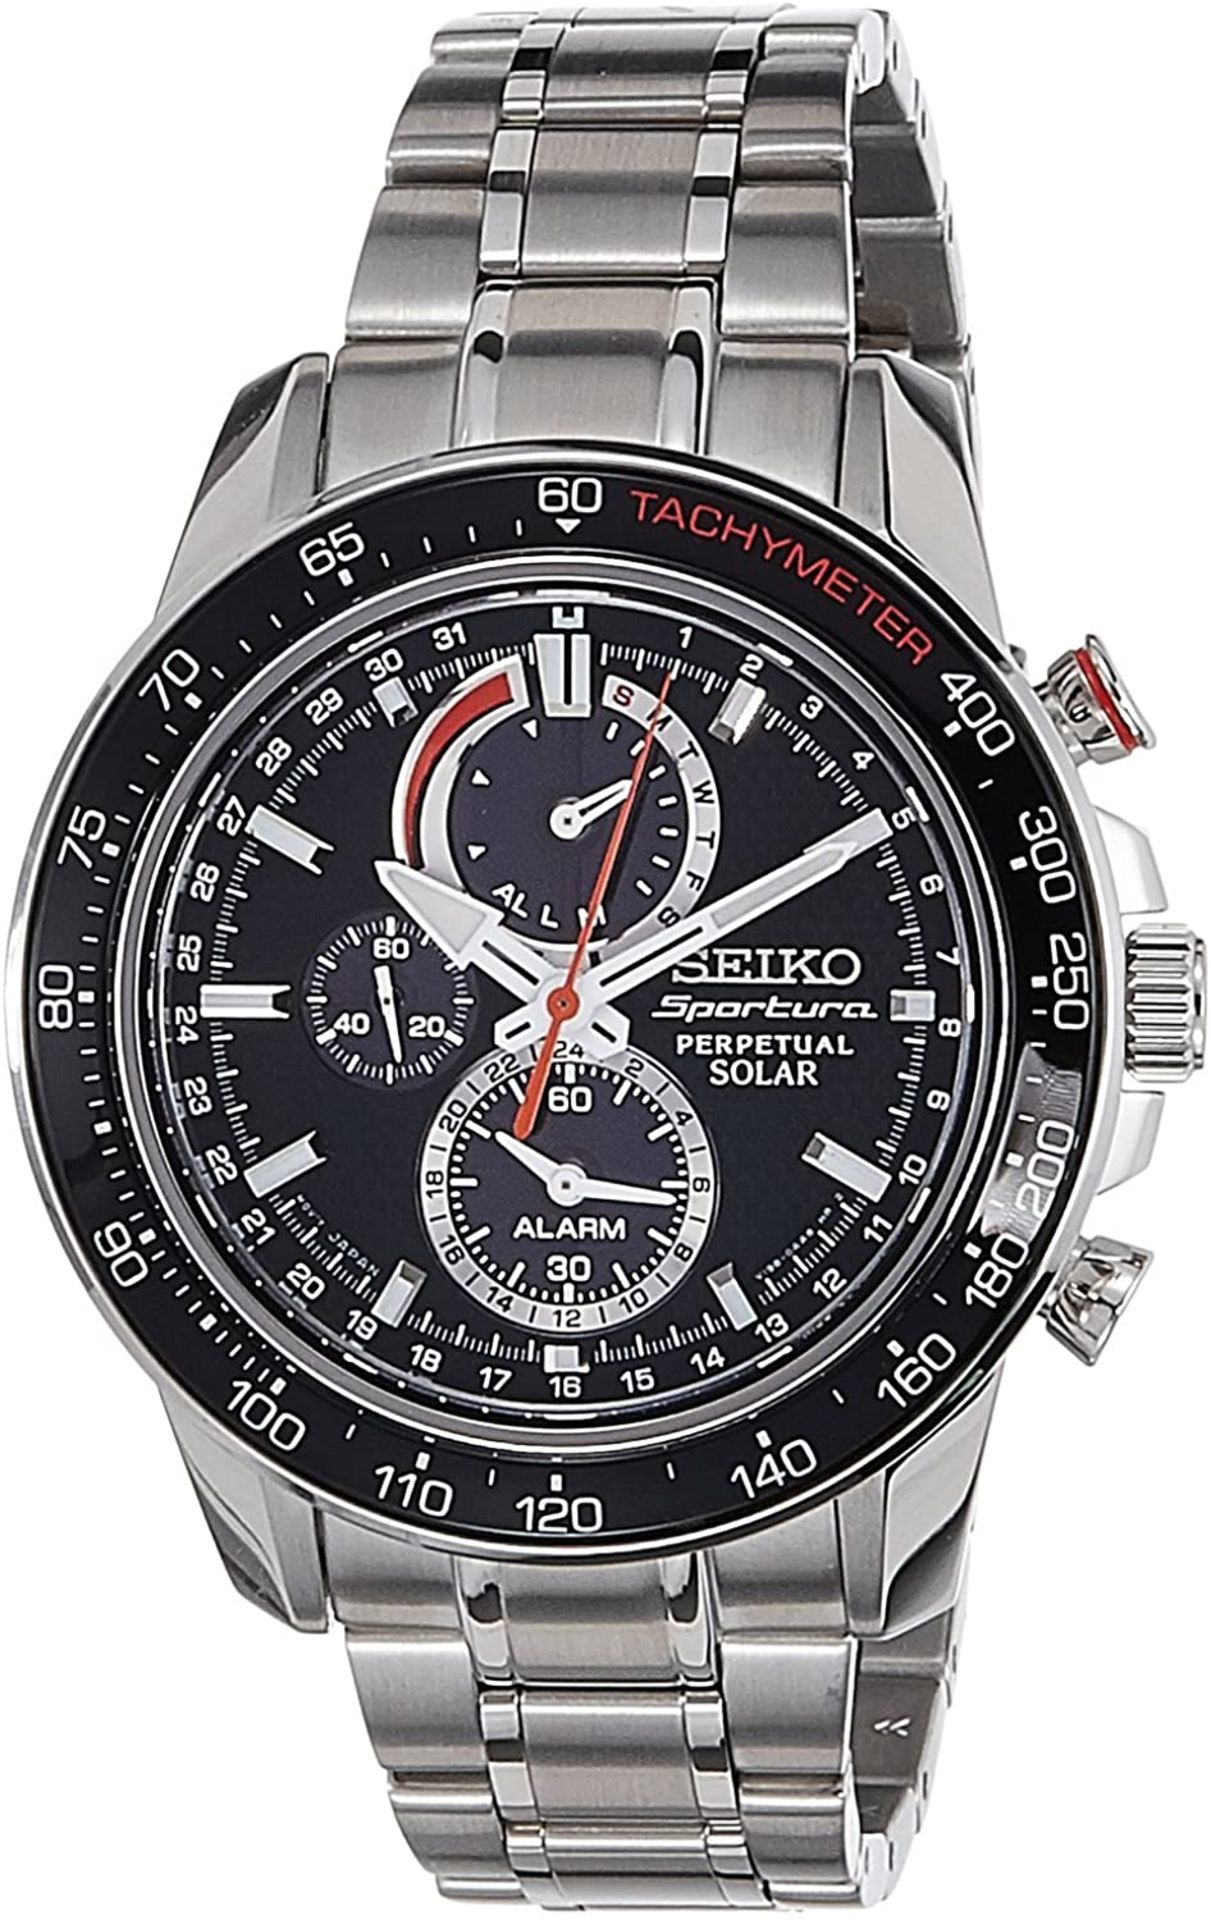 BOXED SEIKO SPORTURA PERPETUAL SOLAR GENTS WATCH, STAINLESS STEEL, RRP-£449.00, GOOD